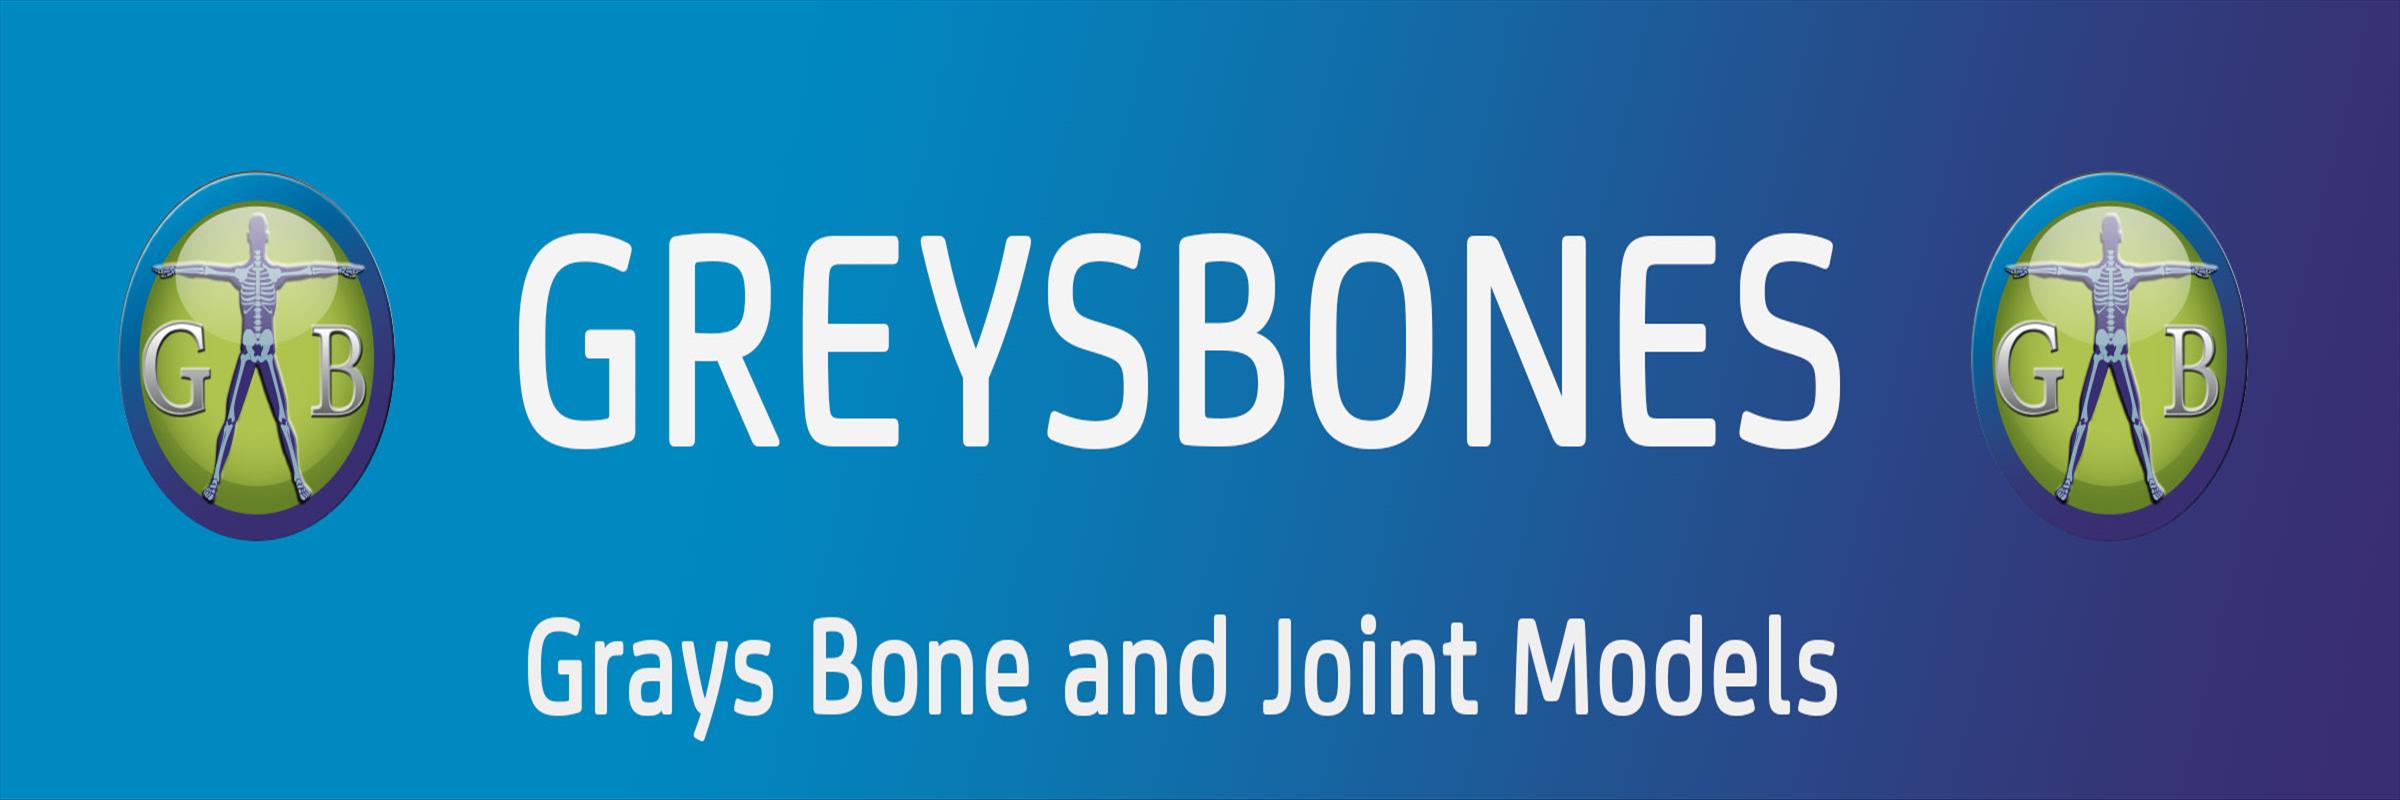 Grays Bone and Joint Models  - image